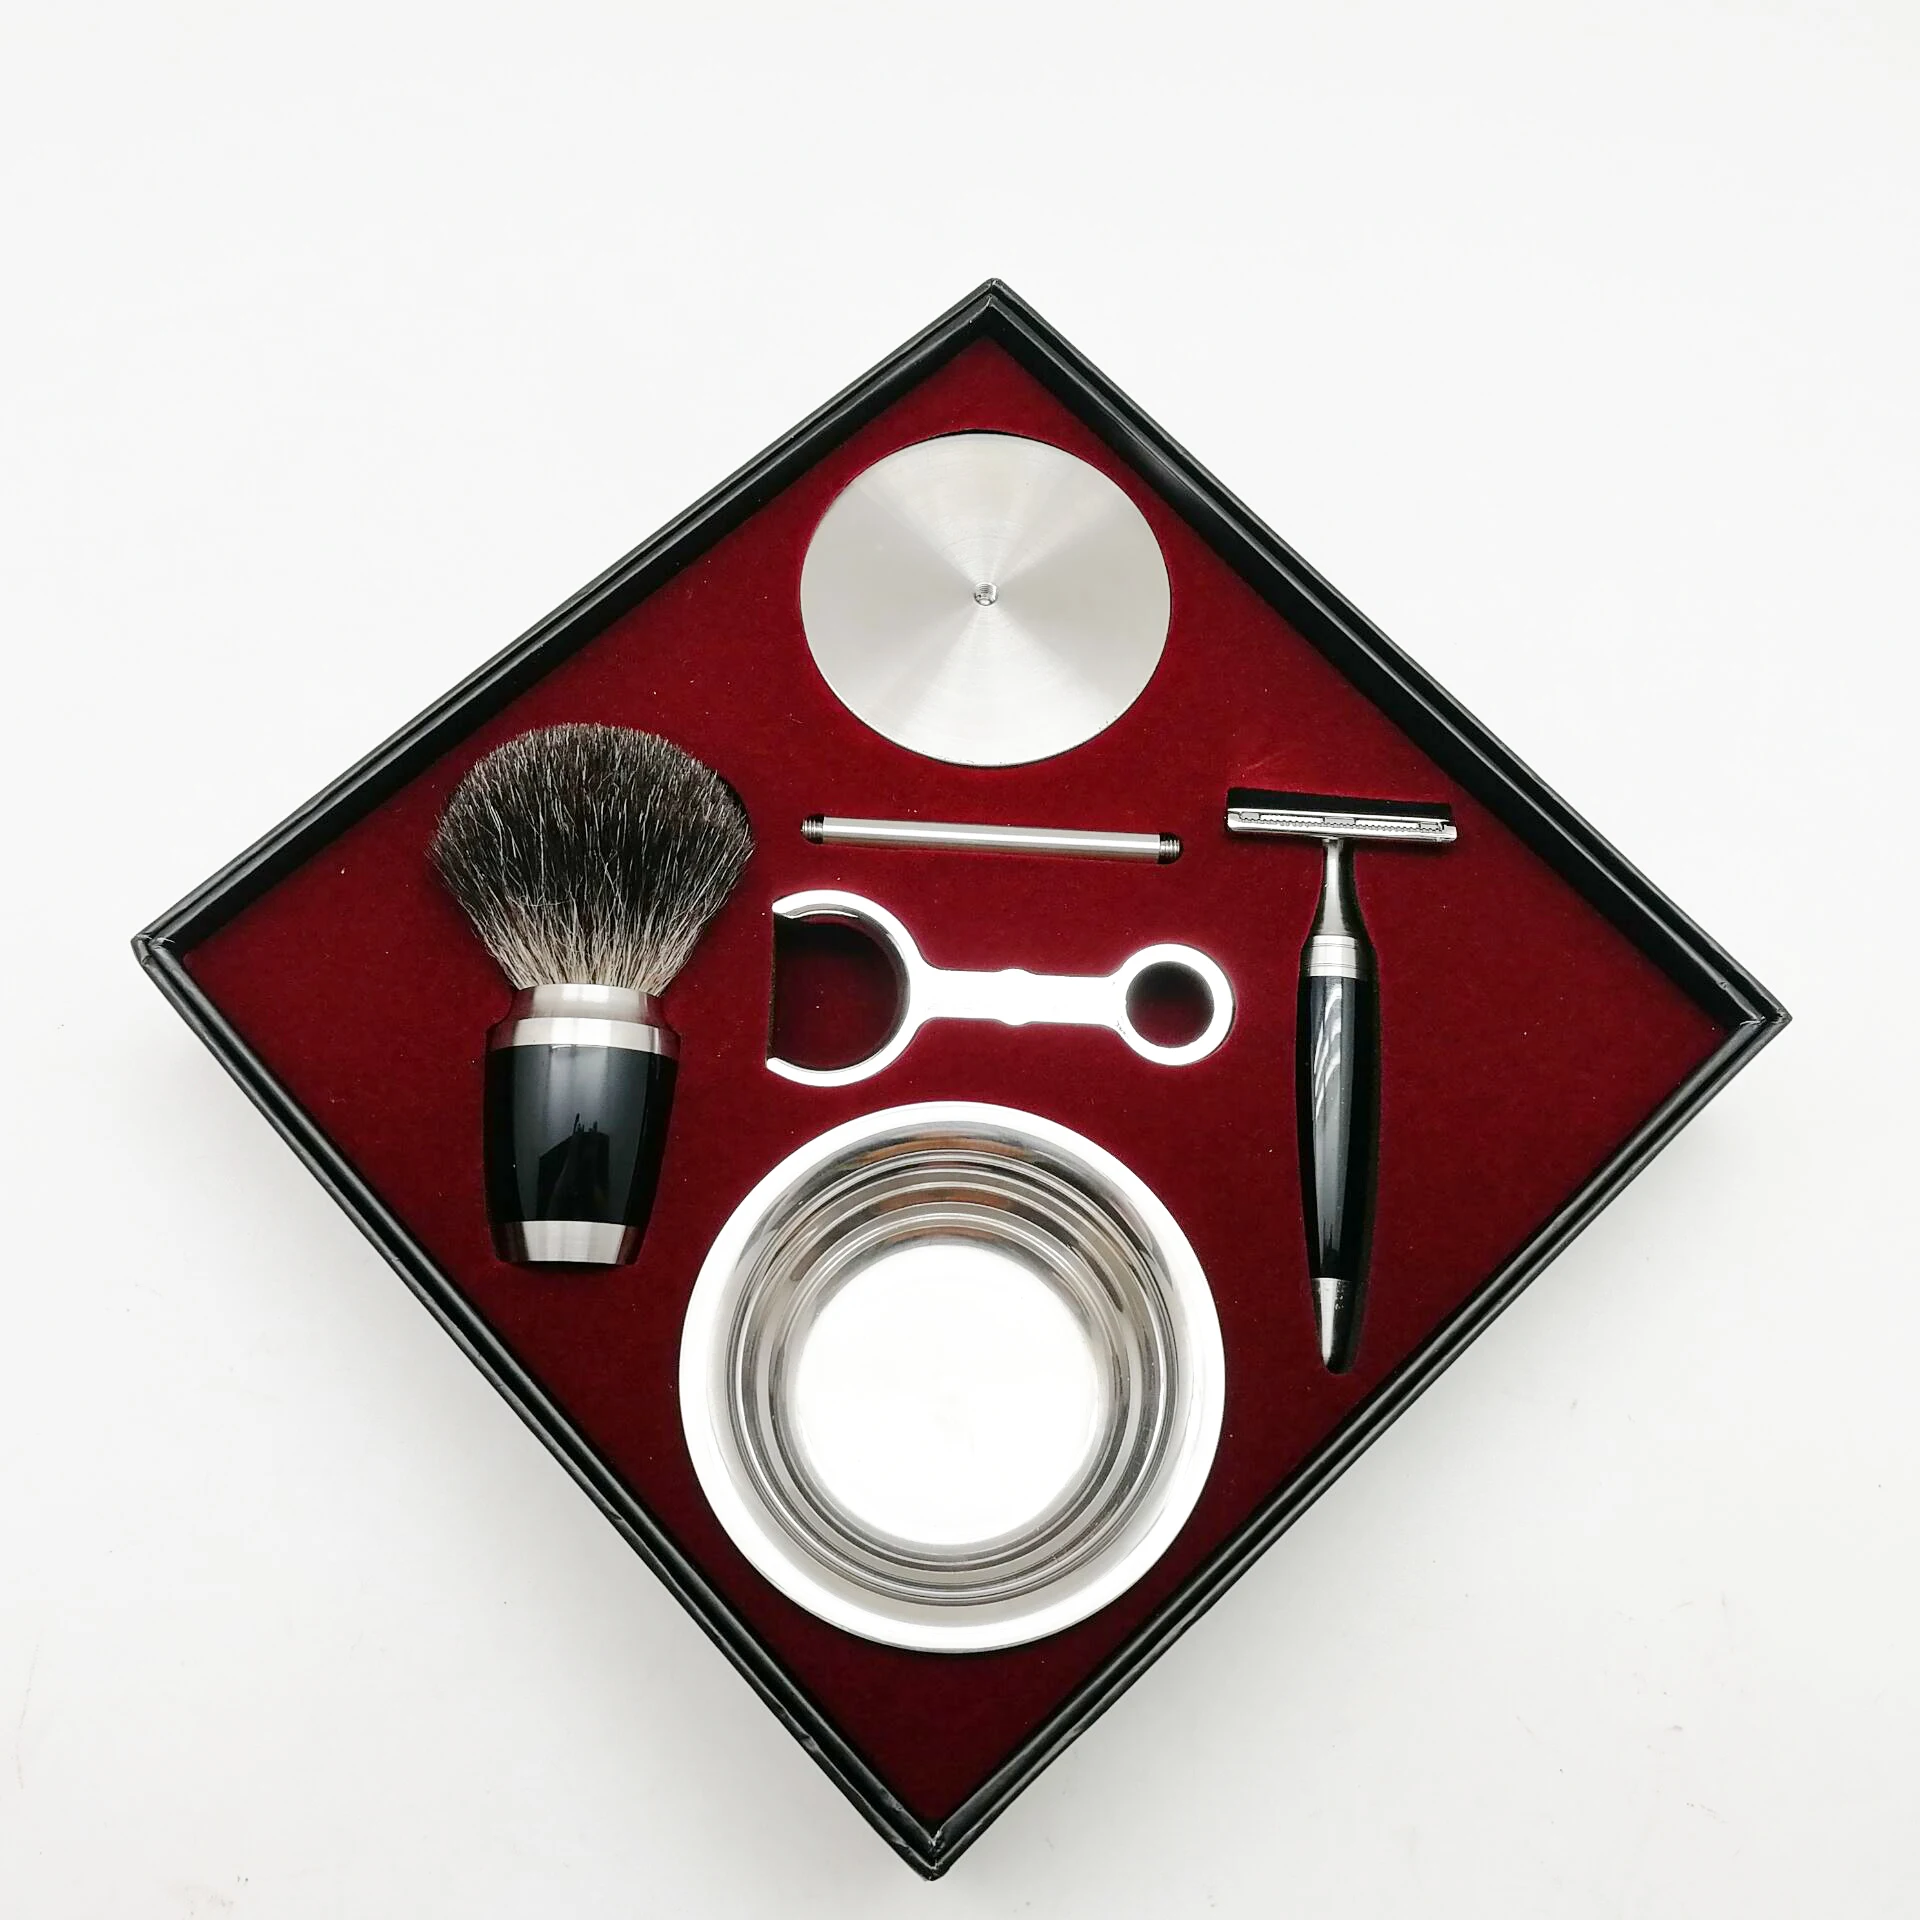 

JDK Complete Wet Shave Kit Includes 4 Items One Safety Razor One Synthetic Hair Brush One Metal Bowl One Holder with Gift Box